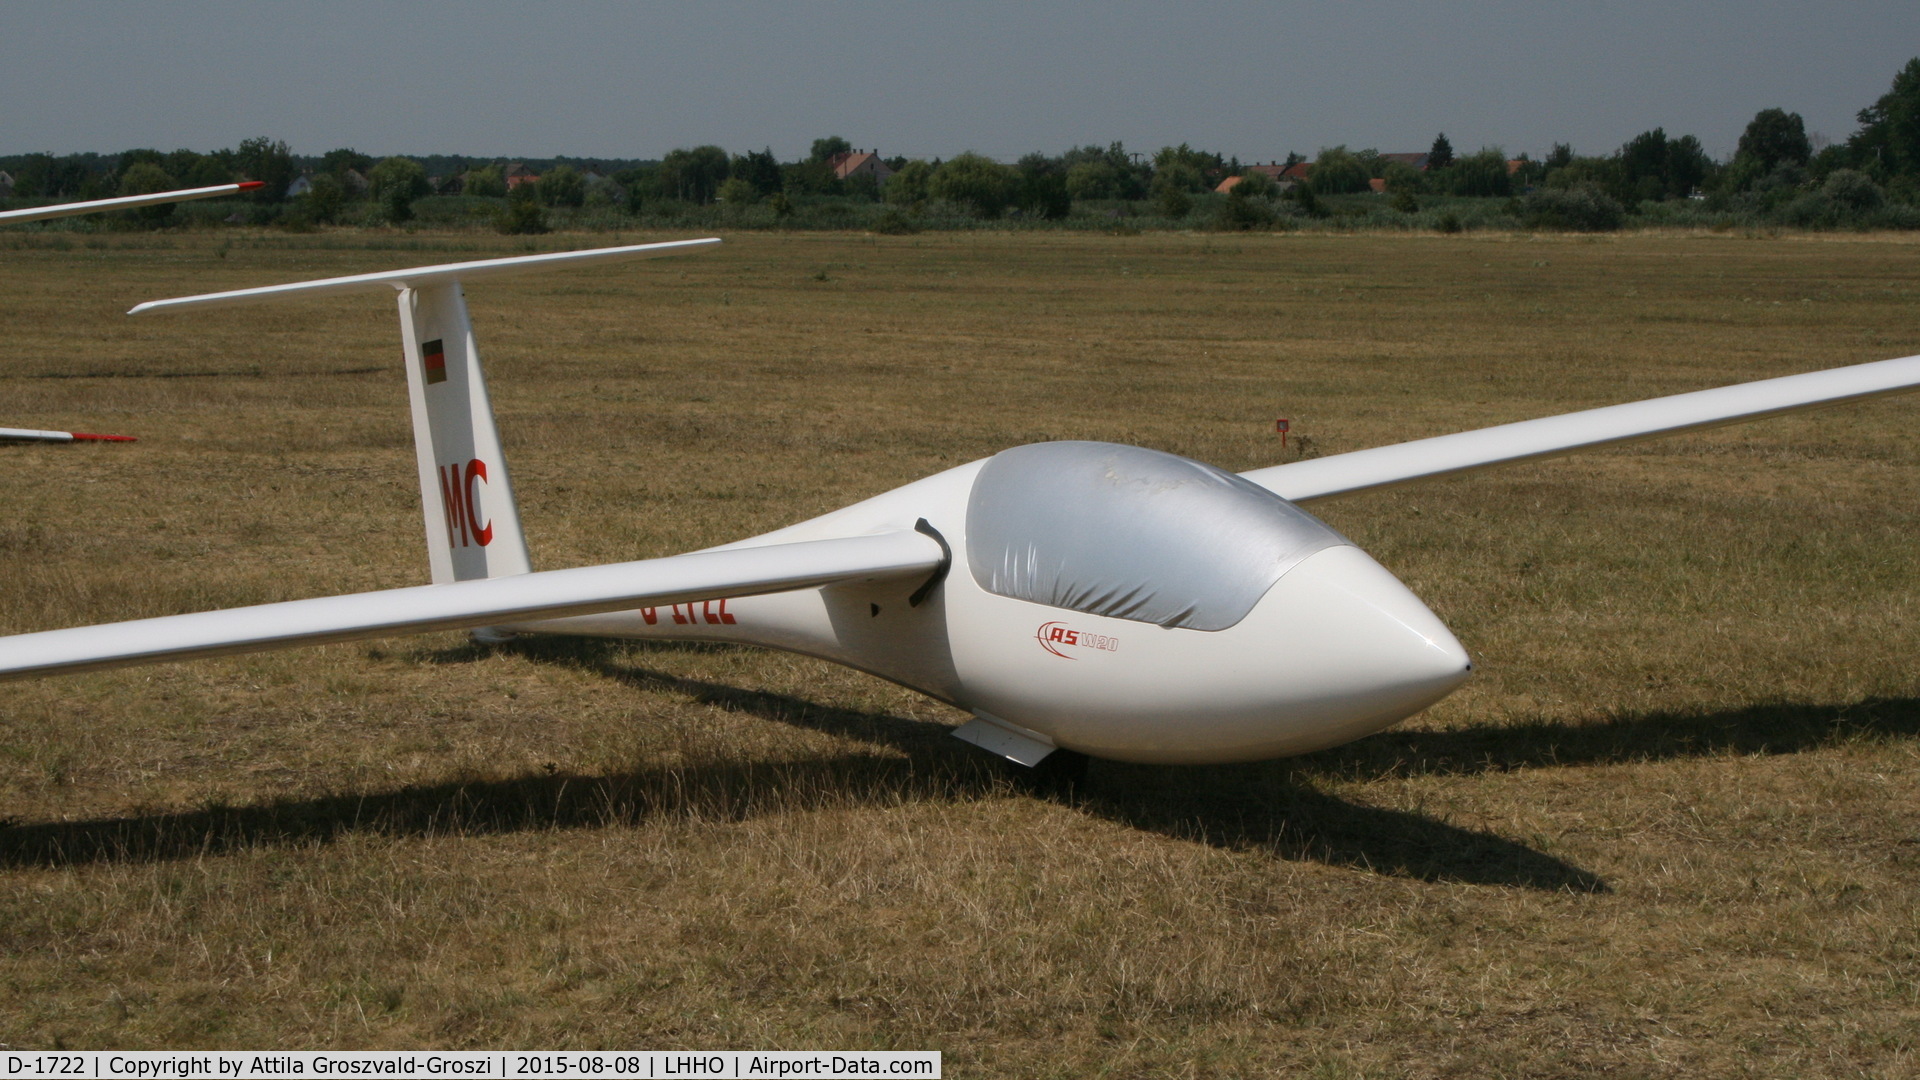 D-1722, 1986 Schleicher ASW 20 C/N 20481, Hajdúszoboszló Airport, Hungary - 60. Hungary Gliding National Championship and third Civis Thermal Cup, 2015